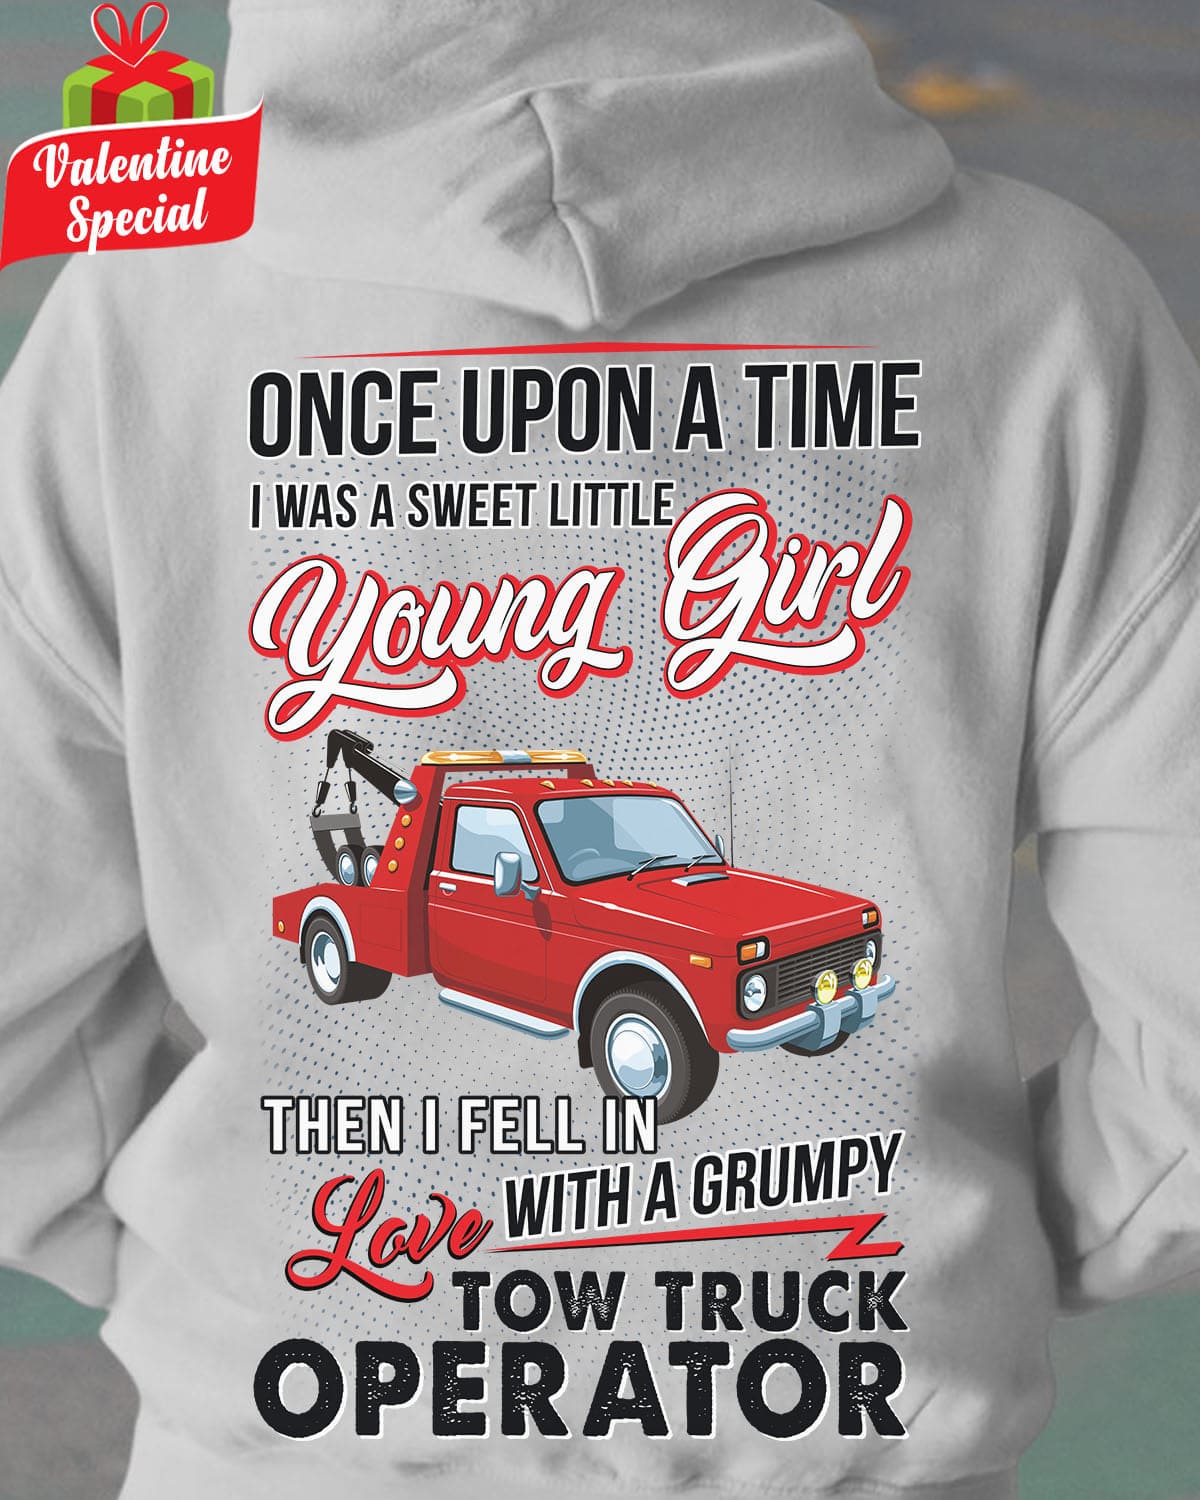 Once upon a time I was a sweet little young girl - Tow truck operator, grumpy tow truck operator